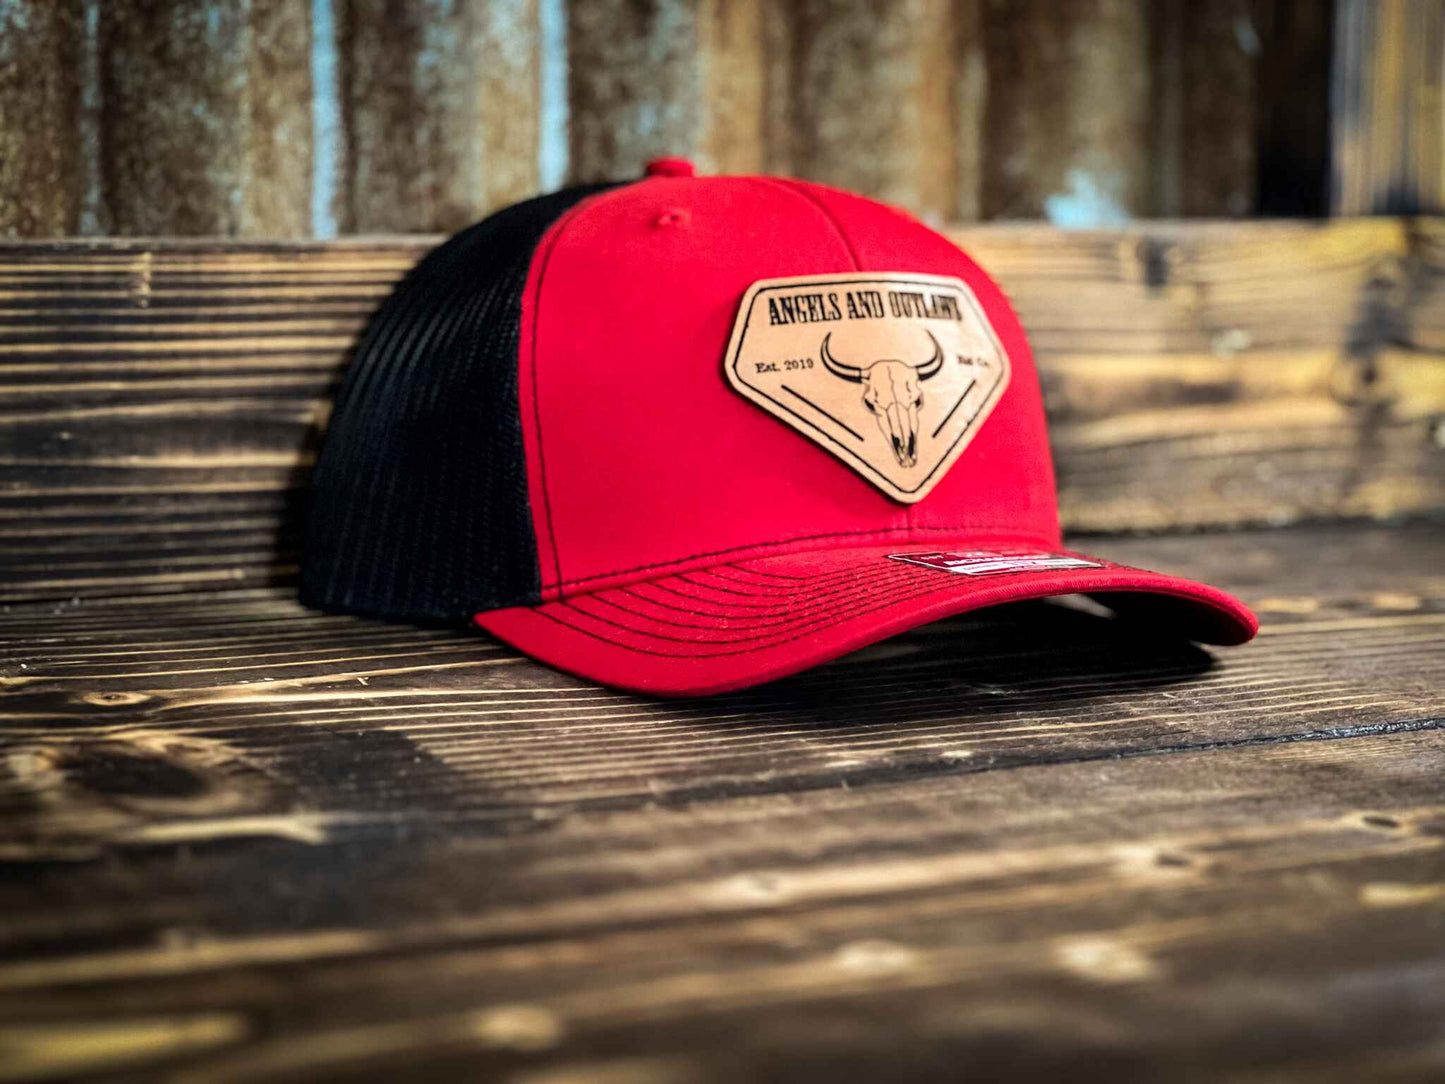 Red front black back mesh back trucker hat with Angels and Outlaws name and a bison skull engraved on a leather patch